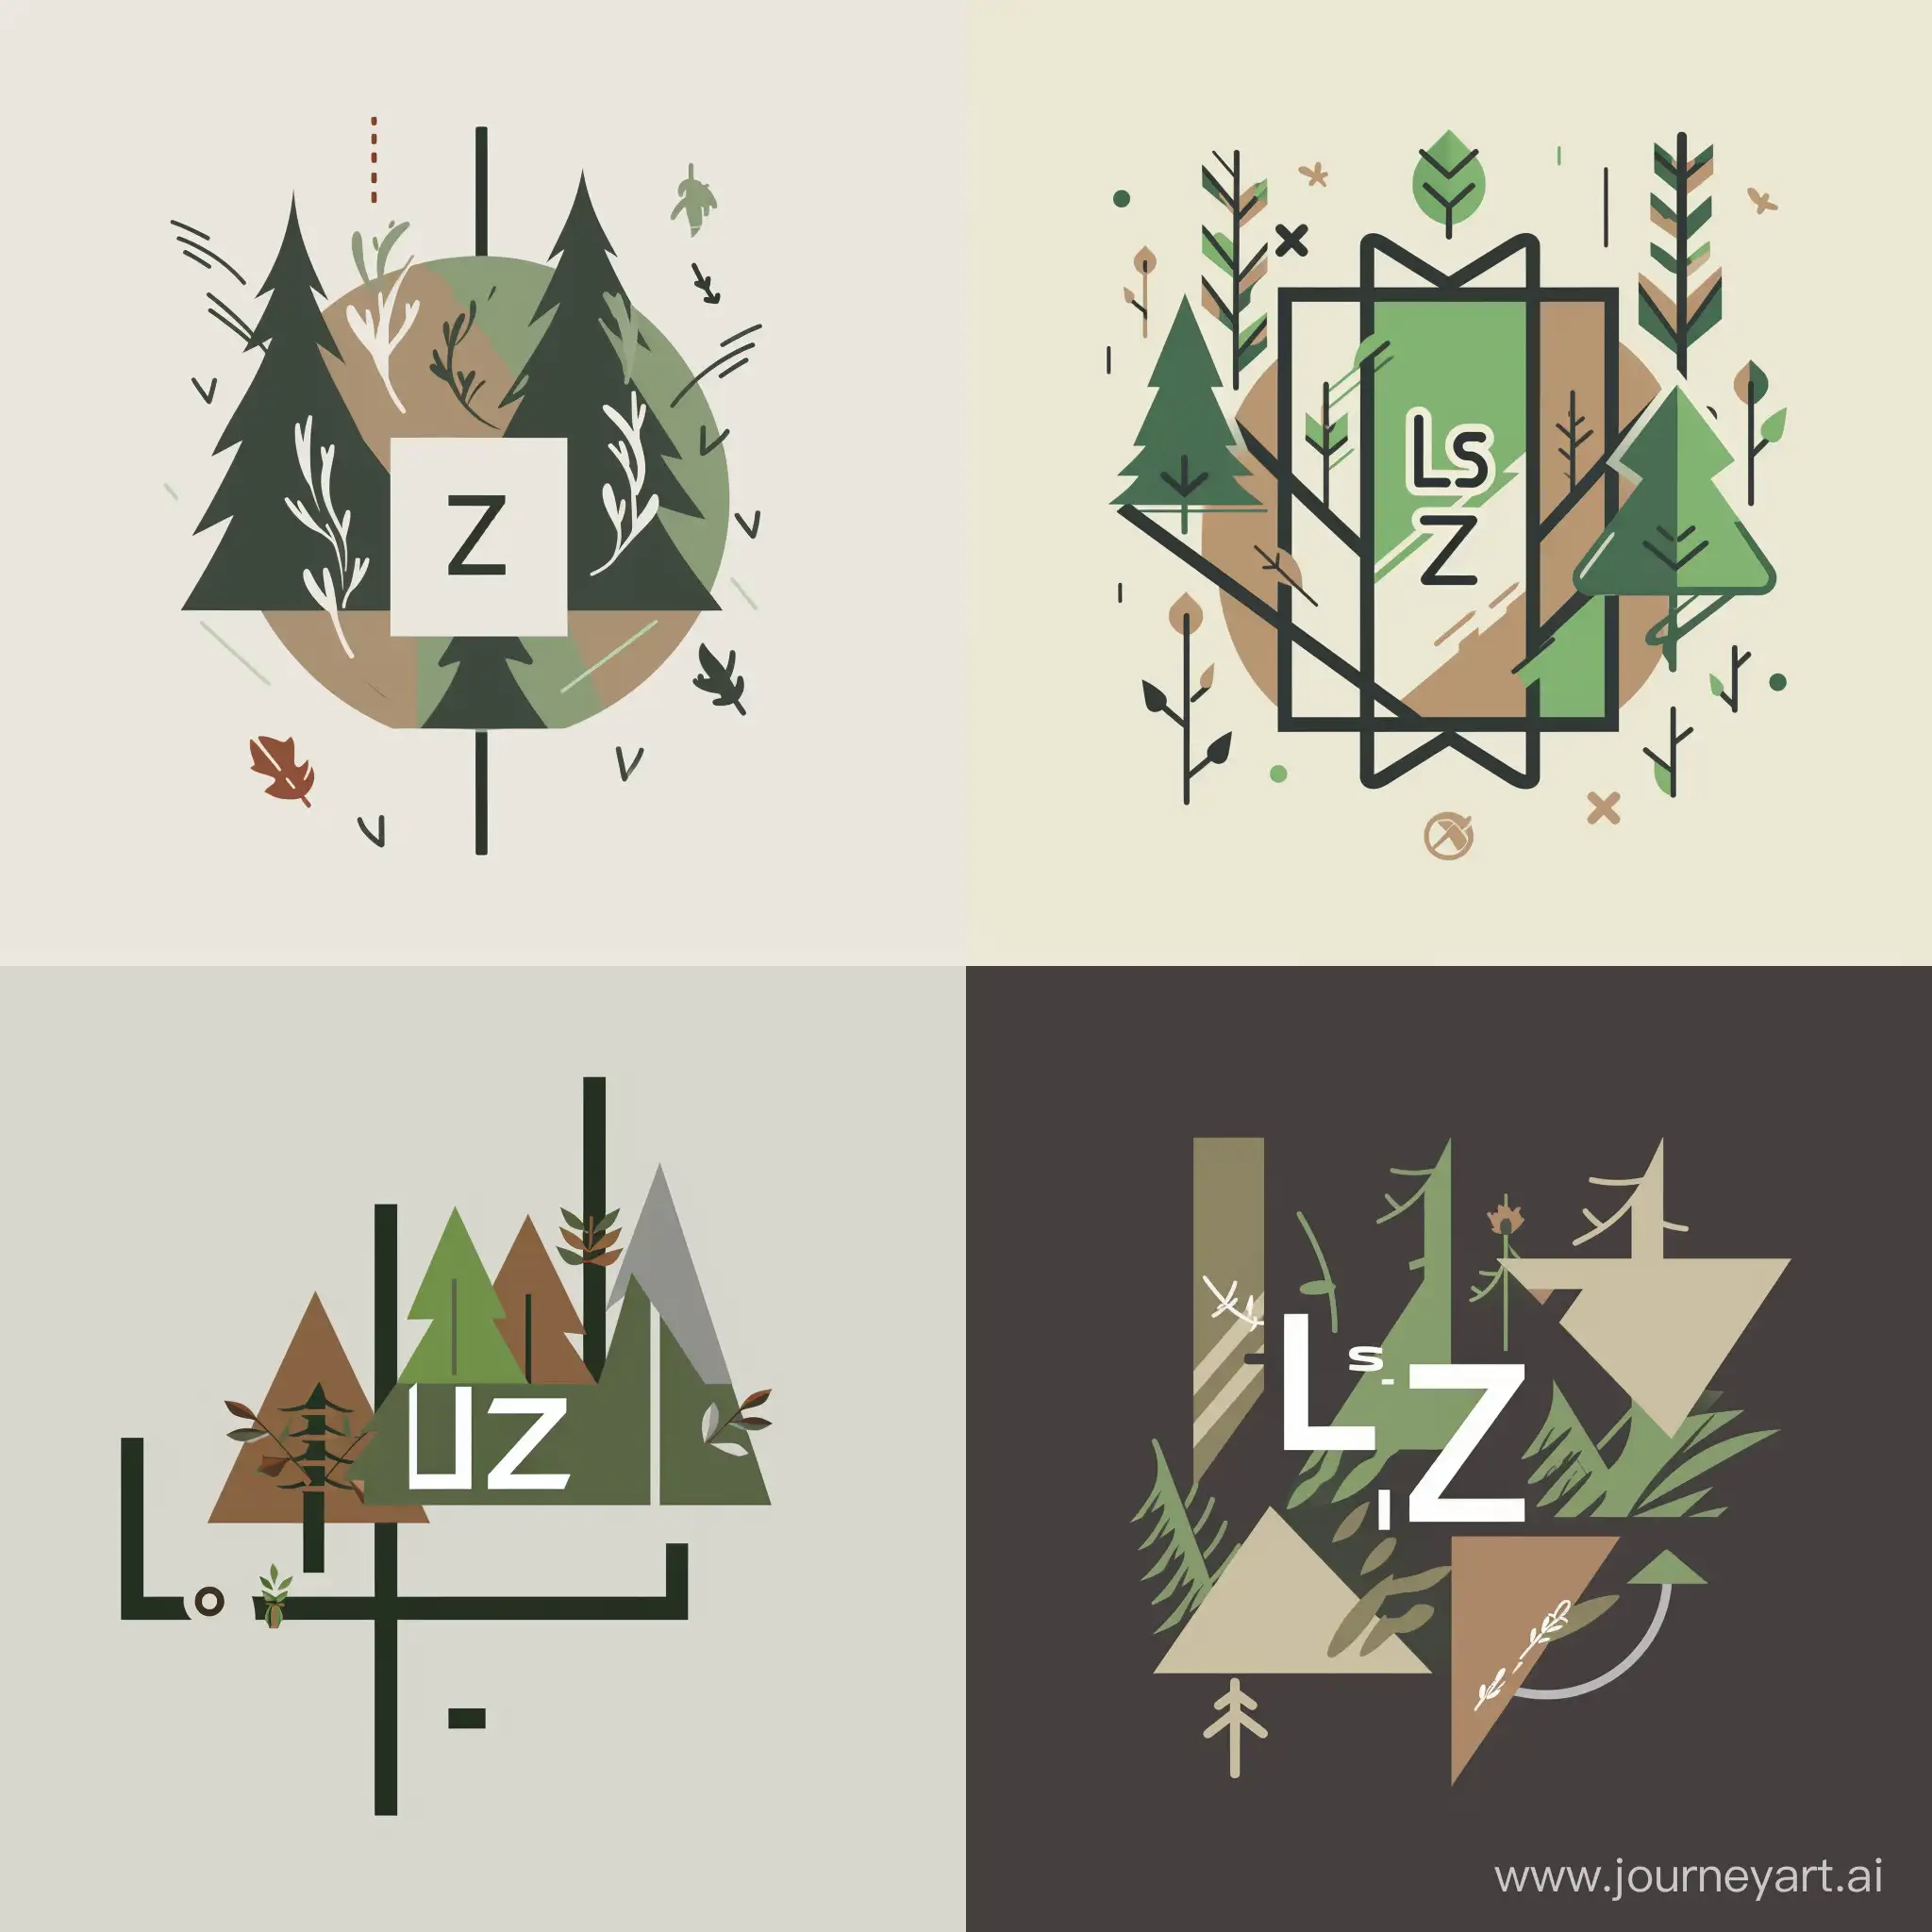 Create a minimalist logo for the Les-Zames team. The name Les-Zames, in Dota slang, refers to a forest brawl. The logo should incorporate the initials 'L' and 'Z' in a style that conveys modernity and simplicity. Use stylized forest contours and natural elements like trees and leaves to create a forest atmosphere. The color palette should include green, brown, and gray. Maintain a simple and elegant design, using a minimal amount of details. Place the initials at the center of the logo and add forest elements to emphasize the theme of a forest fight. The linear style and graphic elements should be refined and clear. Consider the option of adding a thin line or other symbol associated with the concept of a forest brawl. Pay attention to the dynamics of the lines and explore variations in thickness. Remember to adapt the design according to the client's requirements and Dota's characteristics.